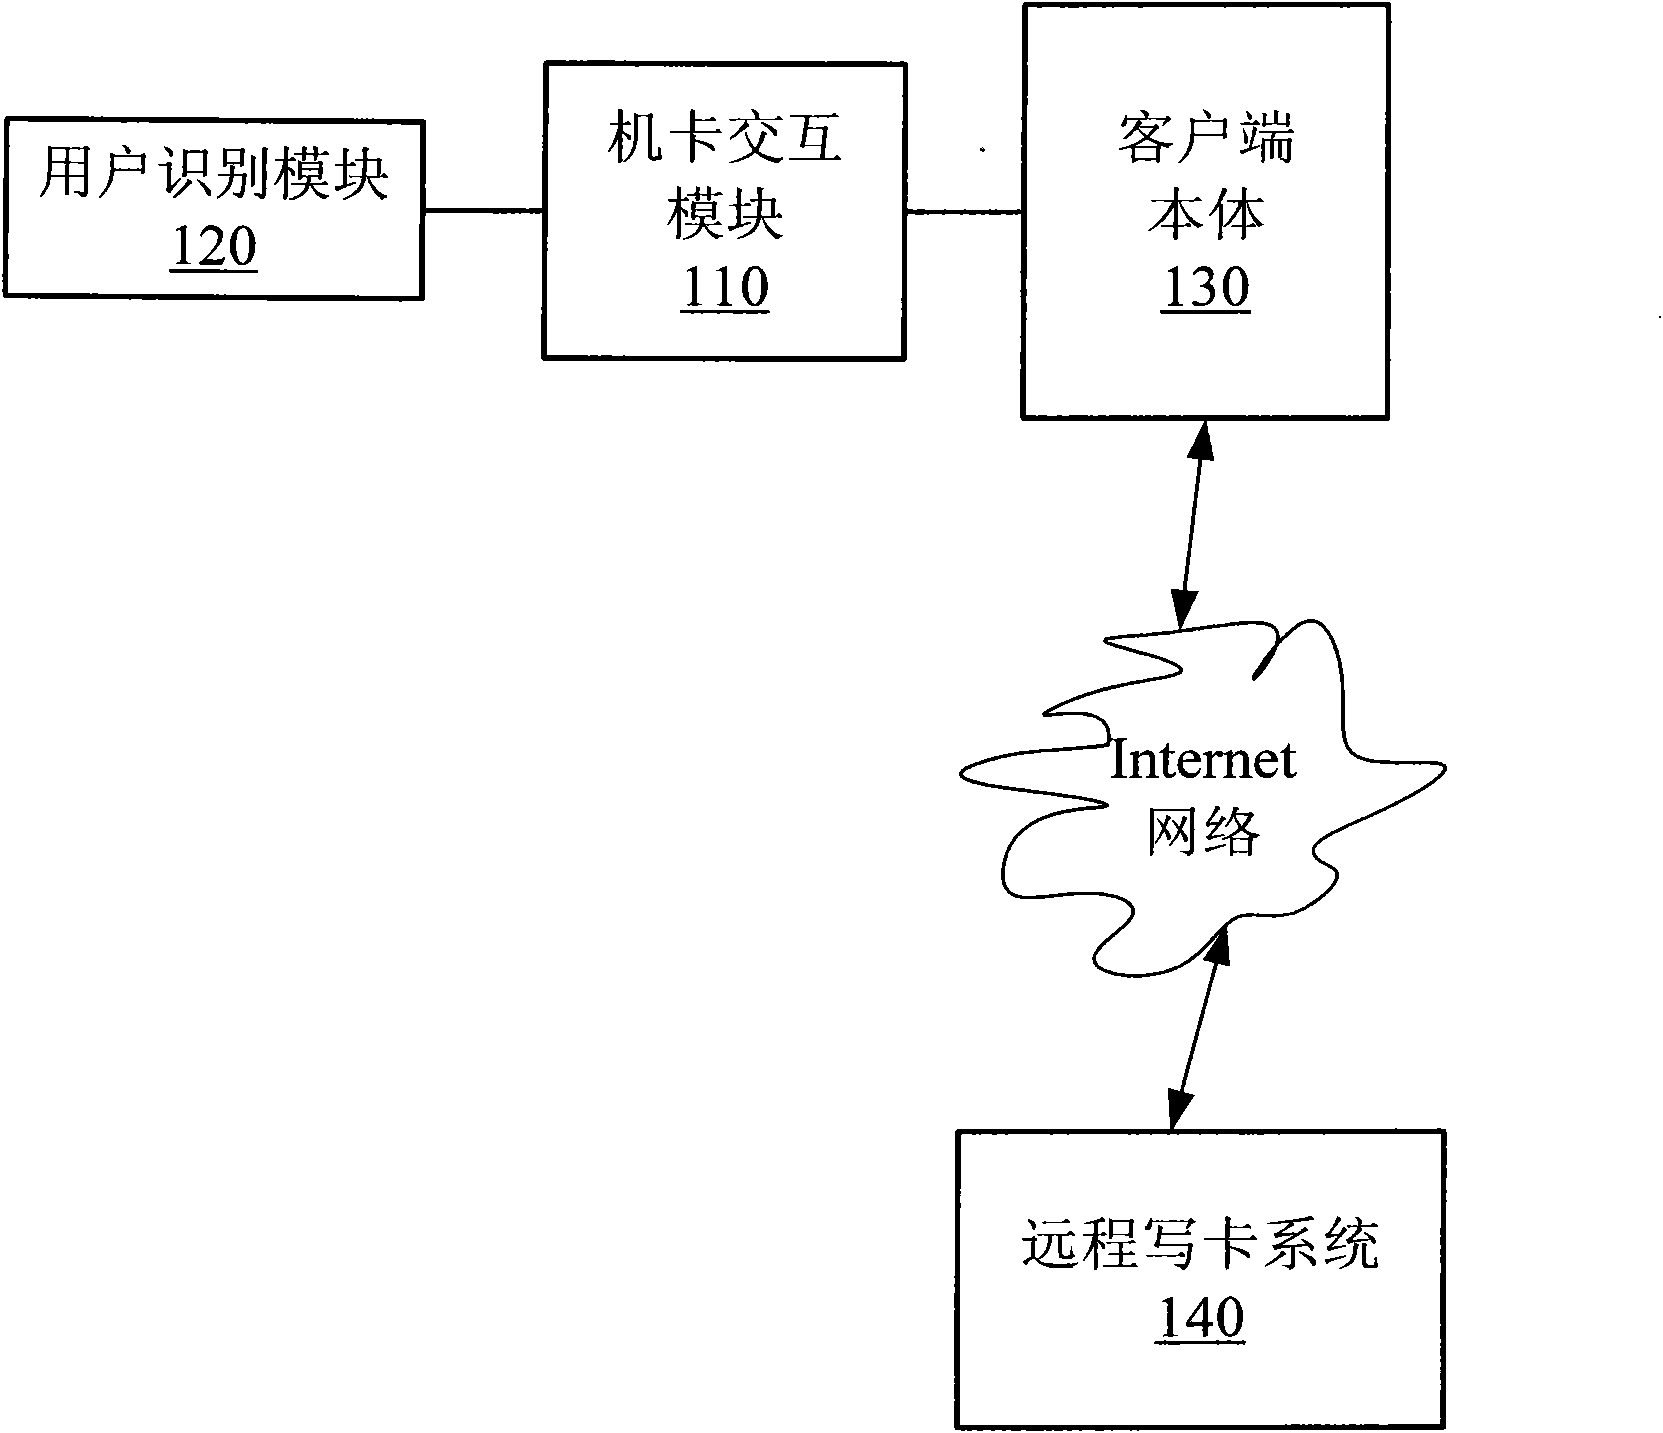 Terminal for registering and opening of user recognition module and/or data writing